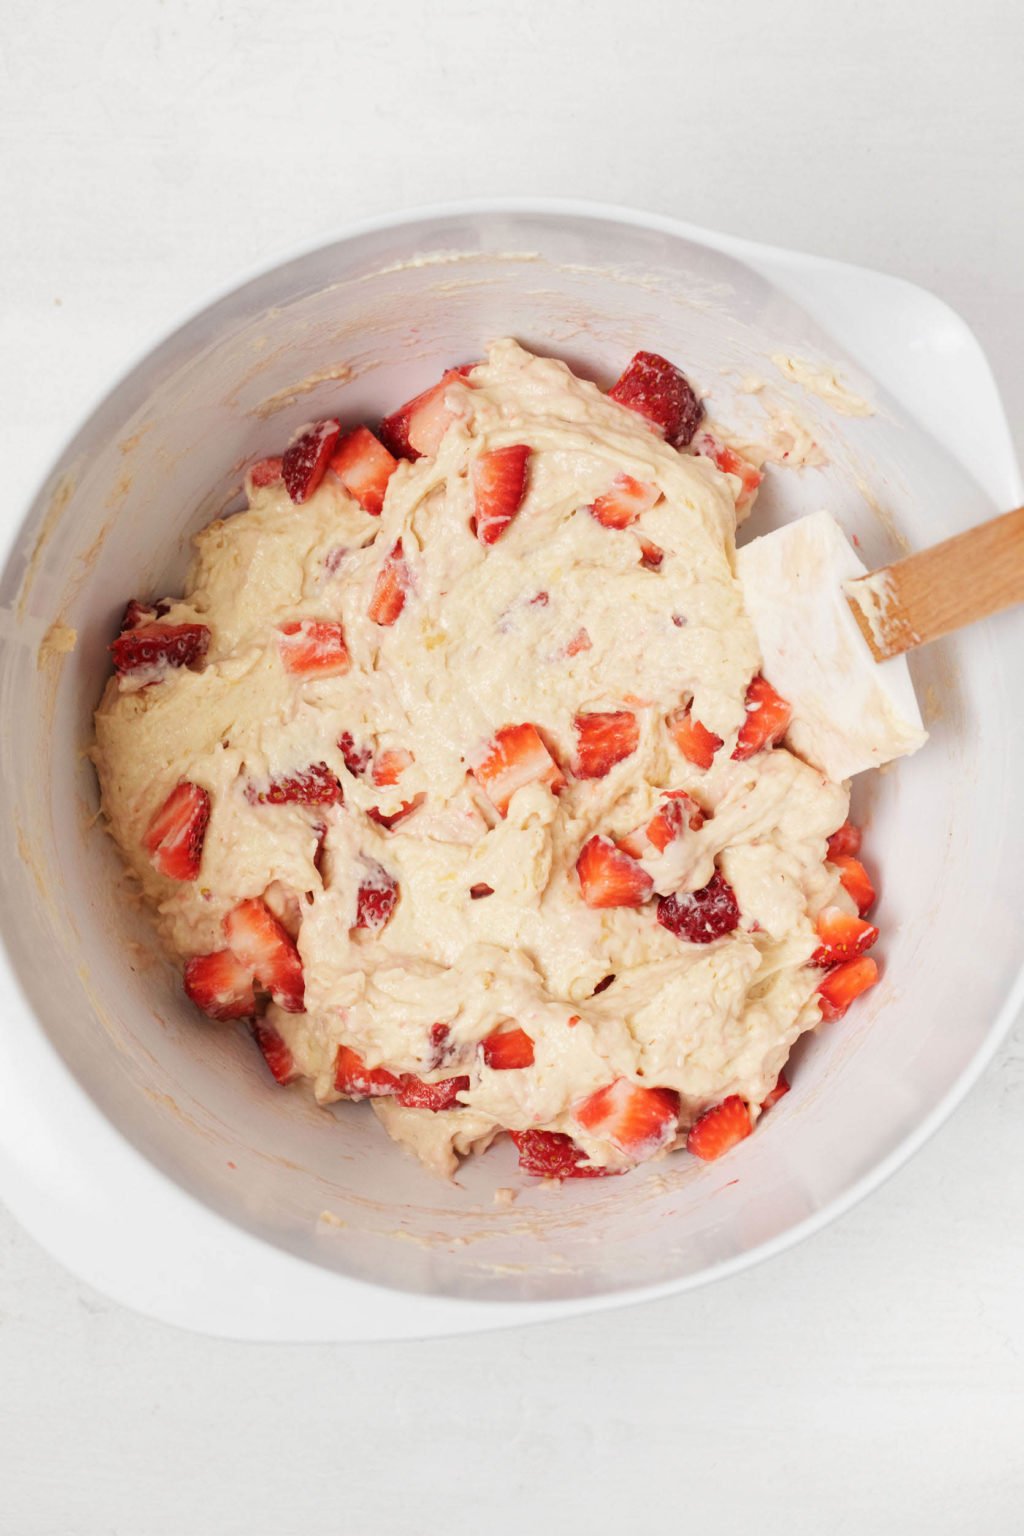 An overhead image of a white bowl of batter for baked goods, which is specked with pieces of fresh fruit.